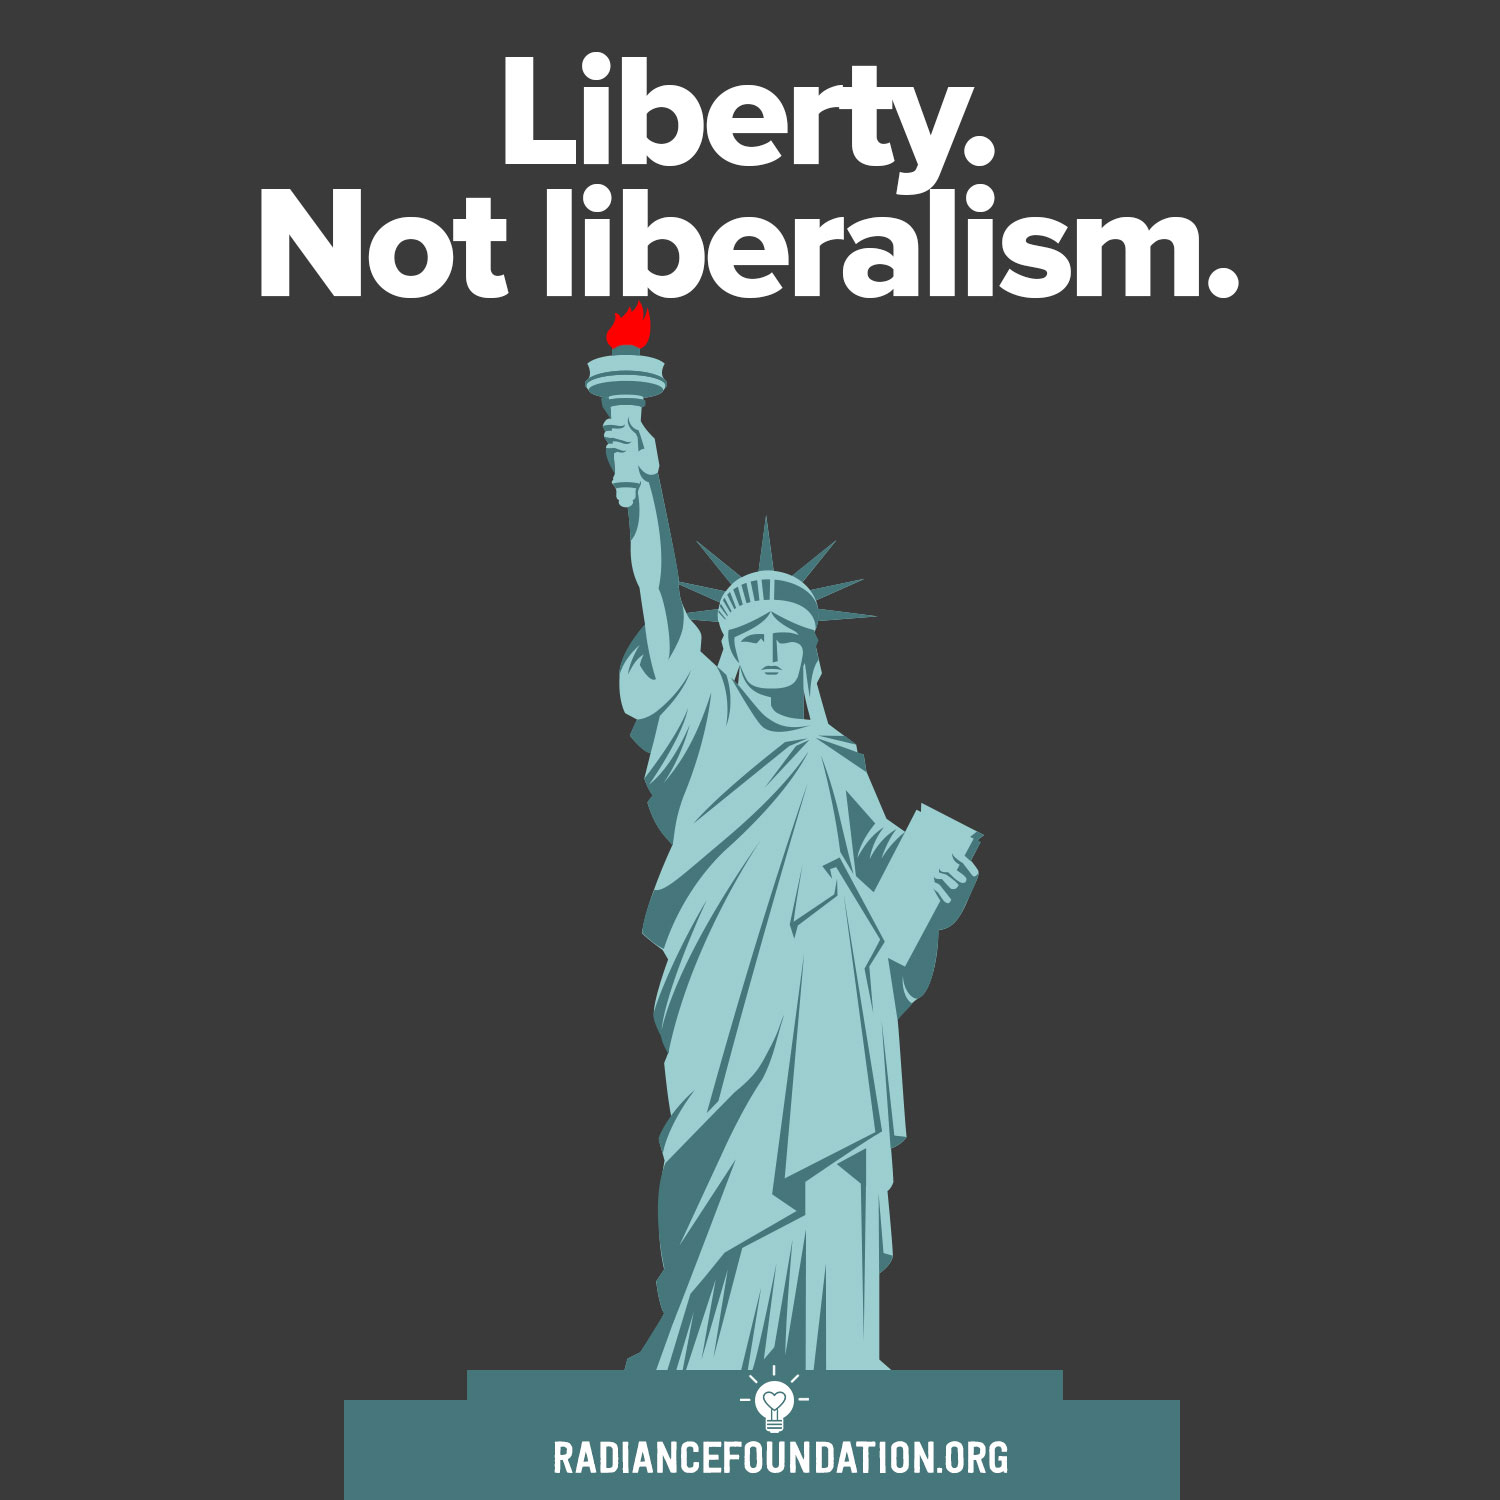 "Liberty. Not Liberalism" by The Radiance Foundation